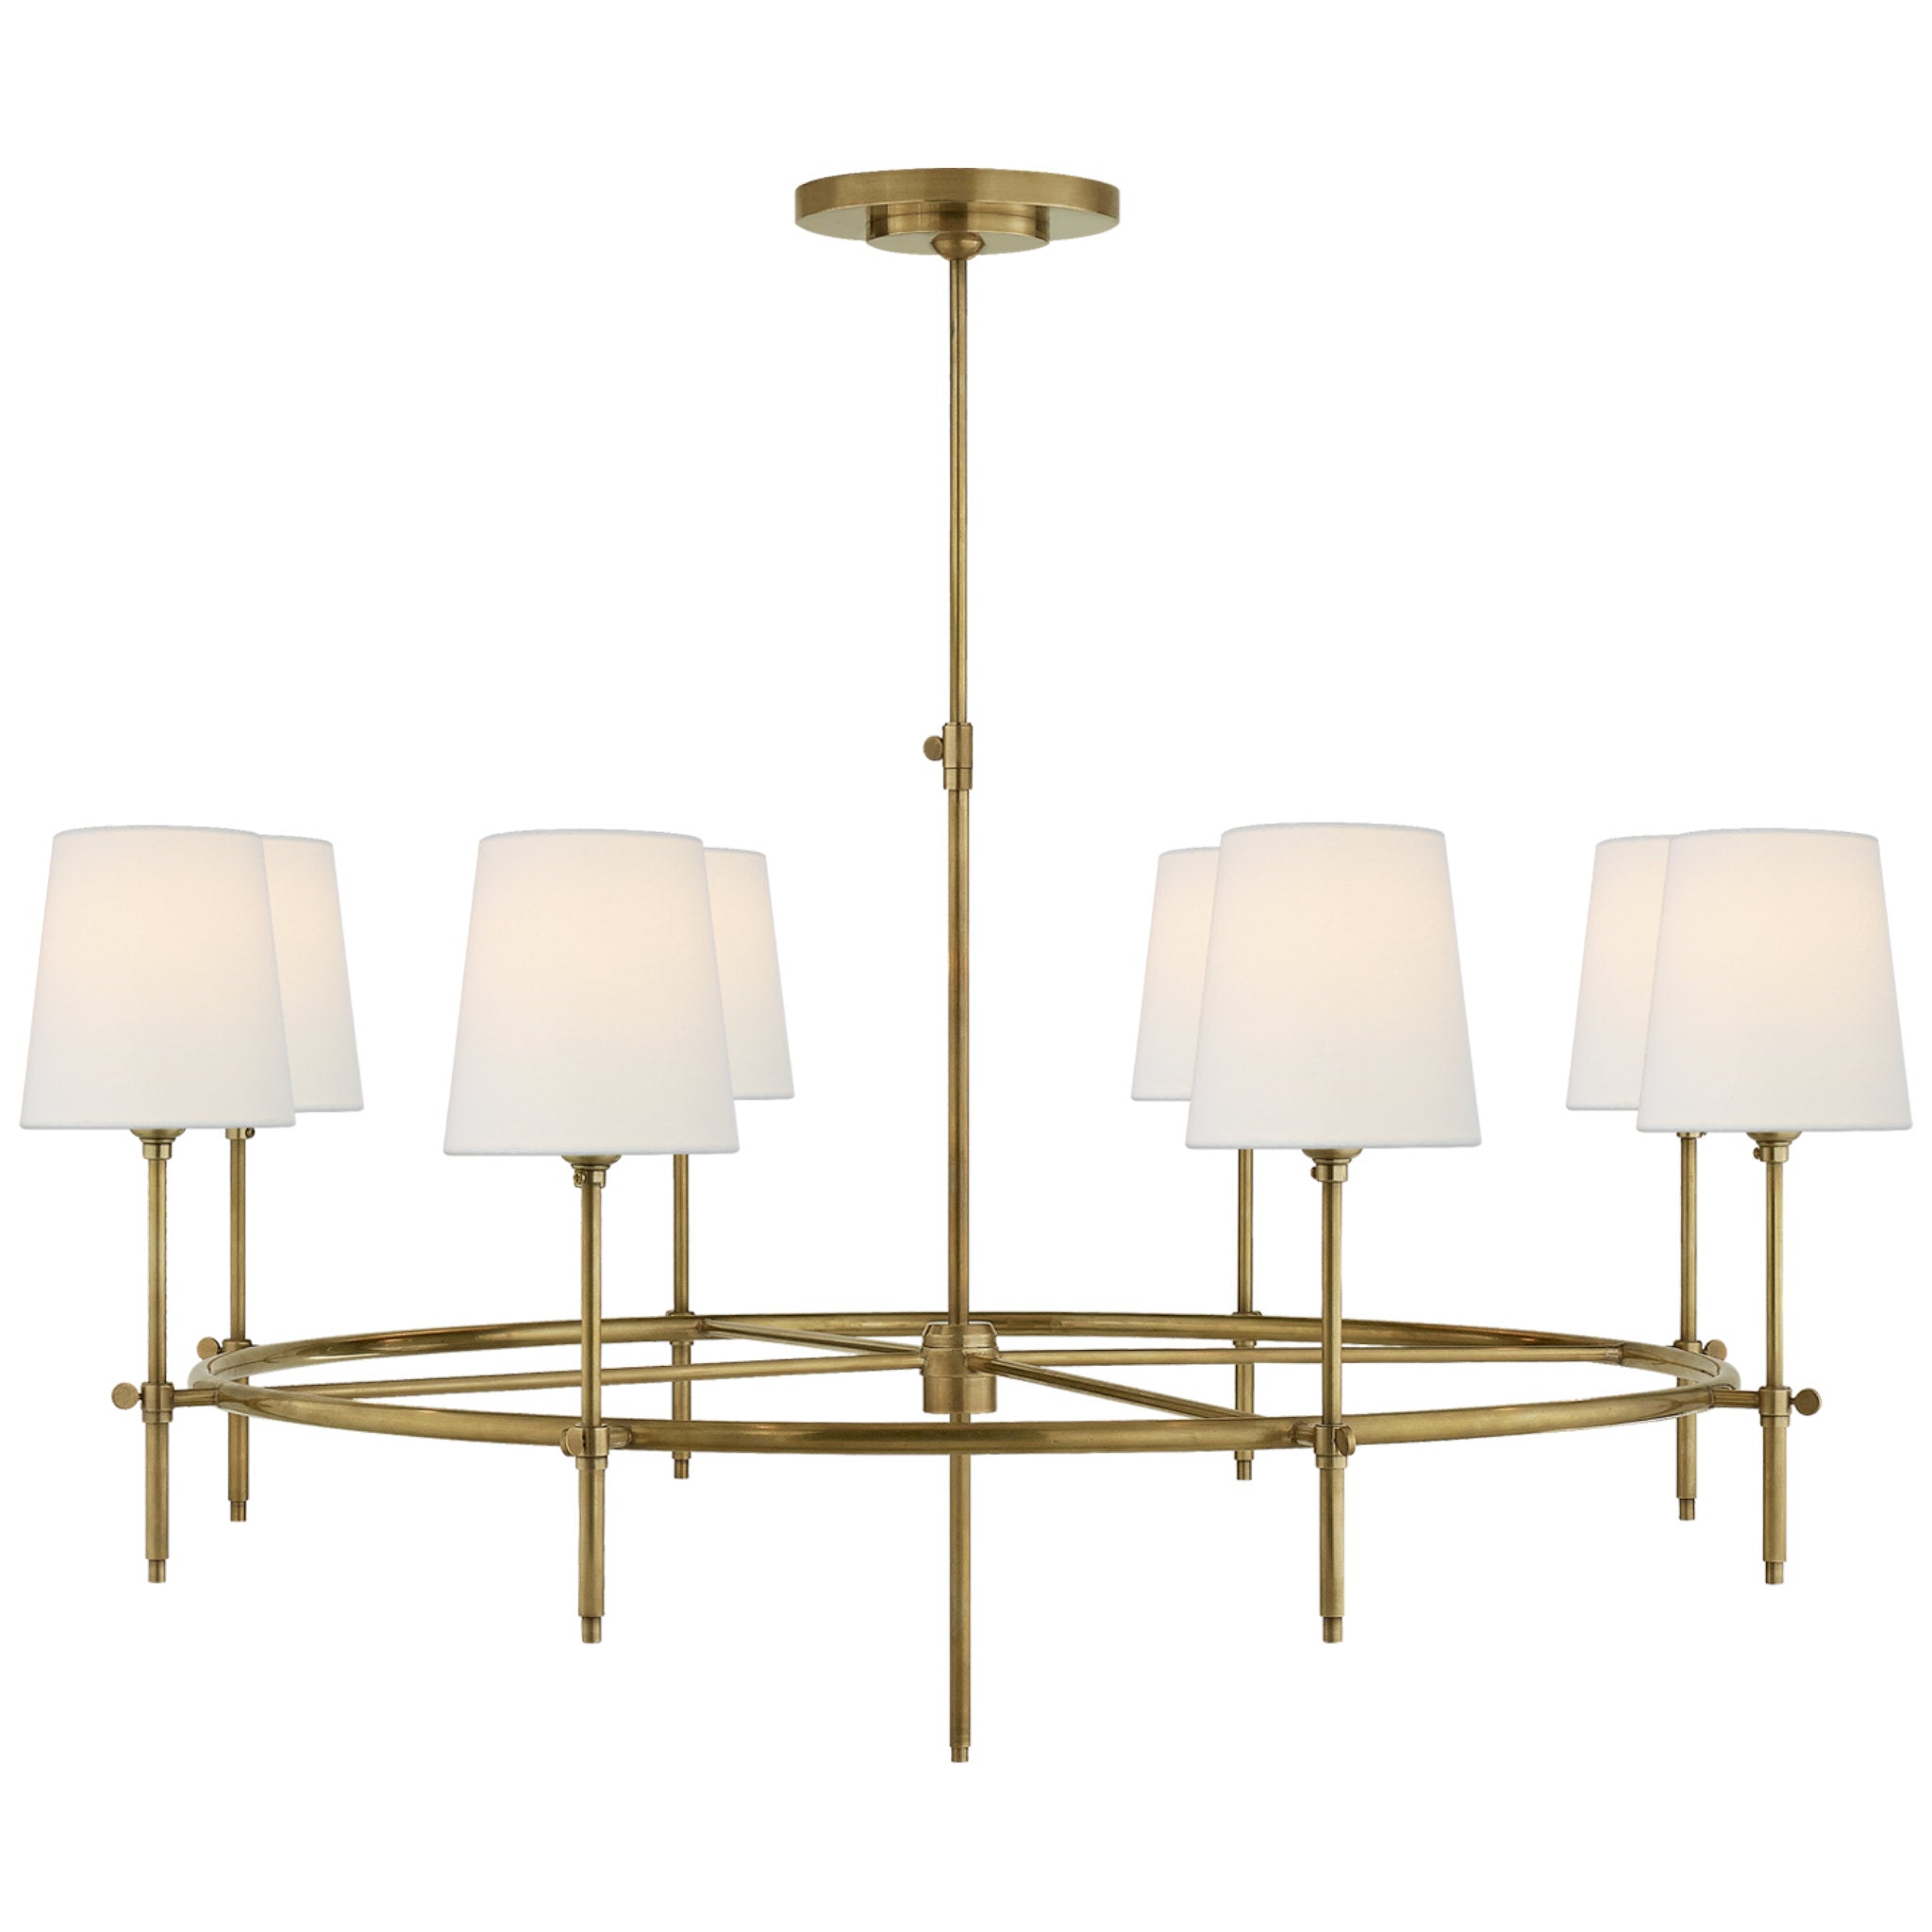 Thomas OBrien Lyra Chandelier in Antique Brass by Visual Comfort Signature  at Destination Lighting